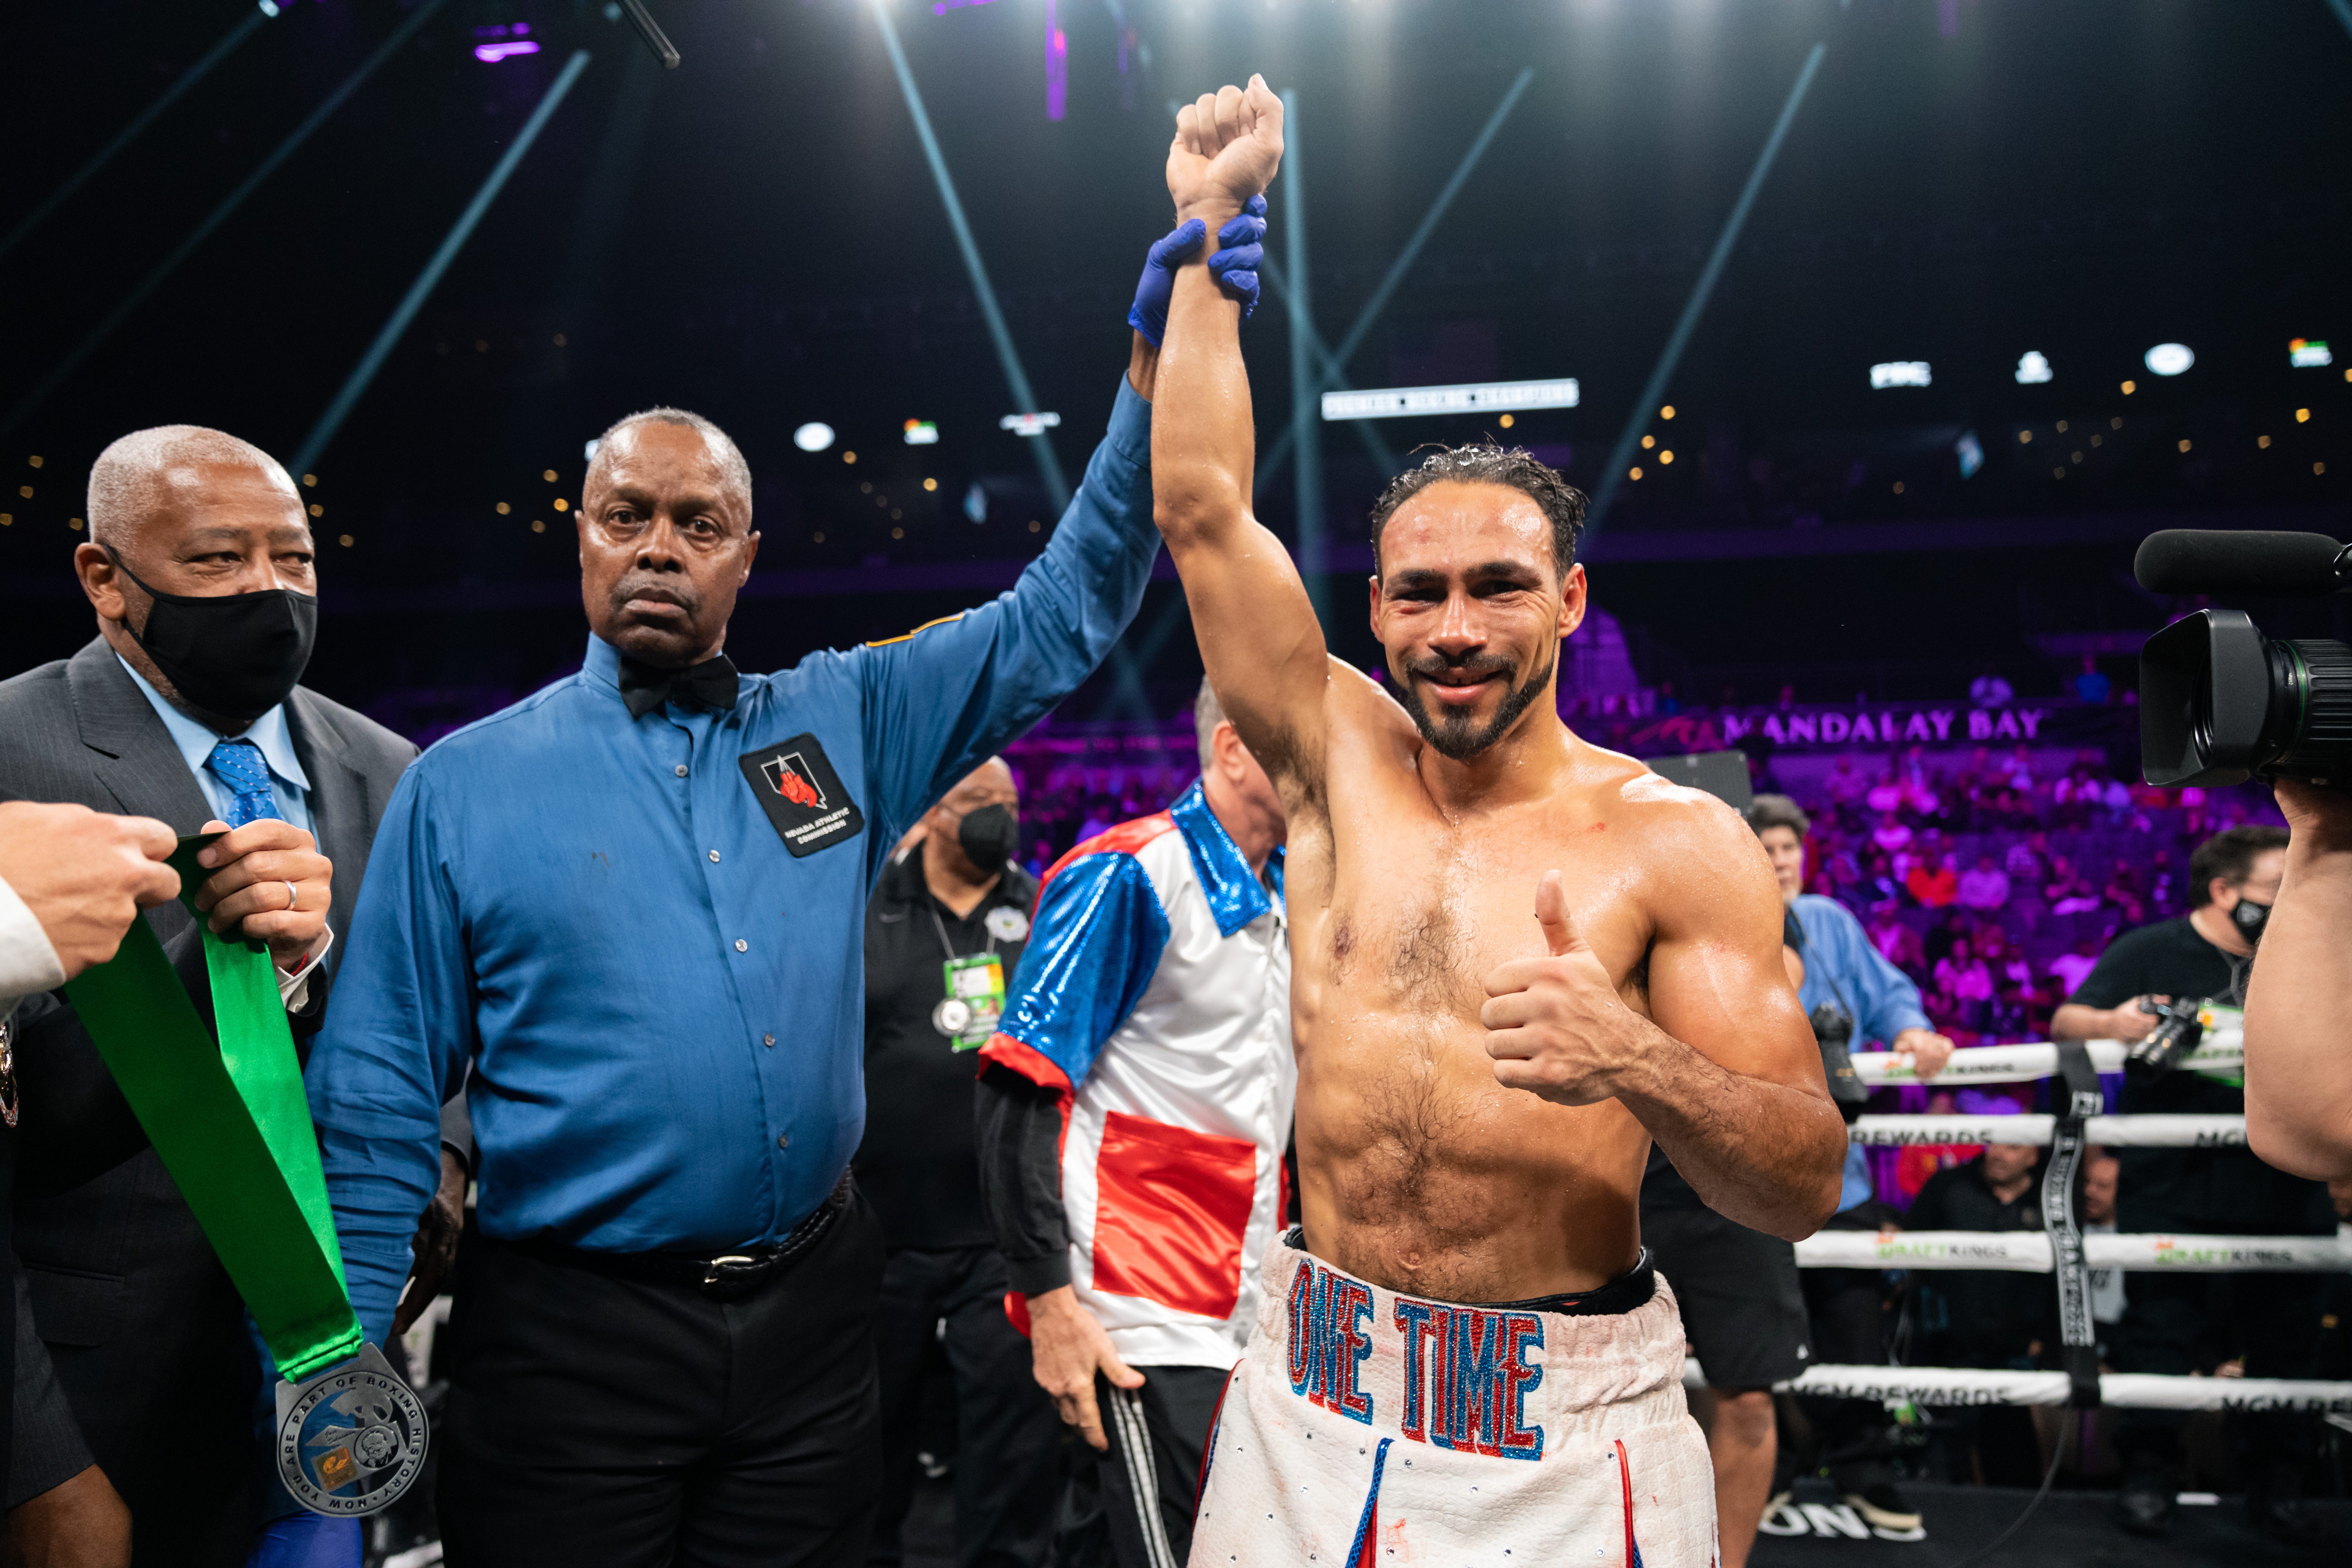 Notebook Pondering next move, Thurman interested in challenging Crawford